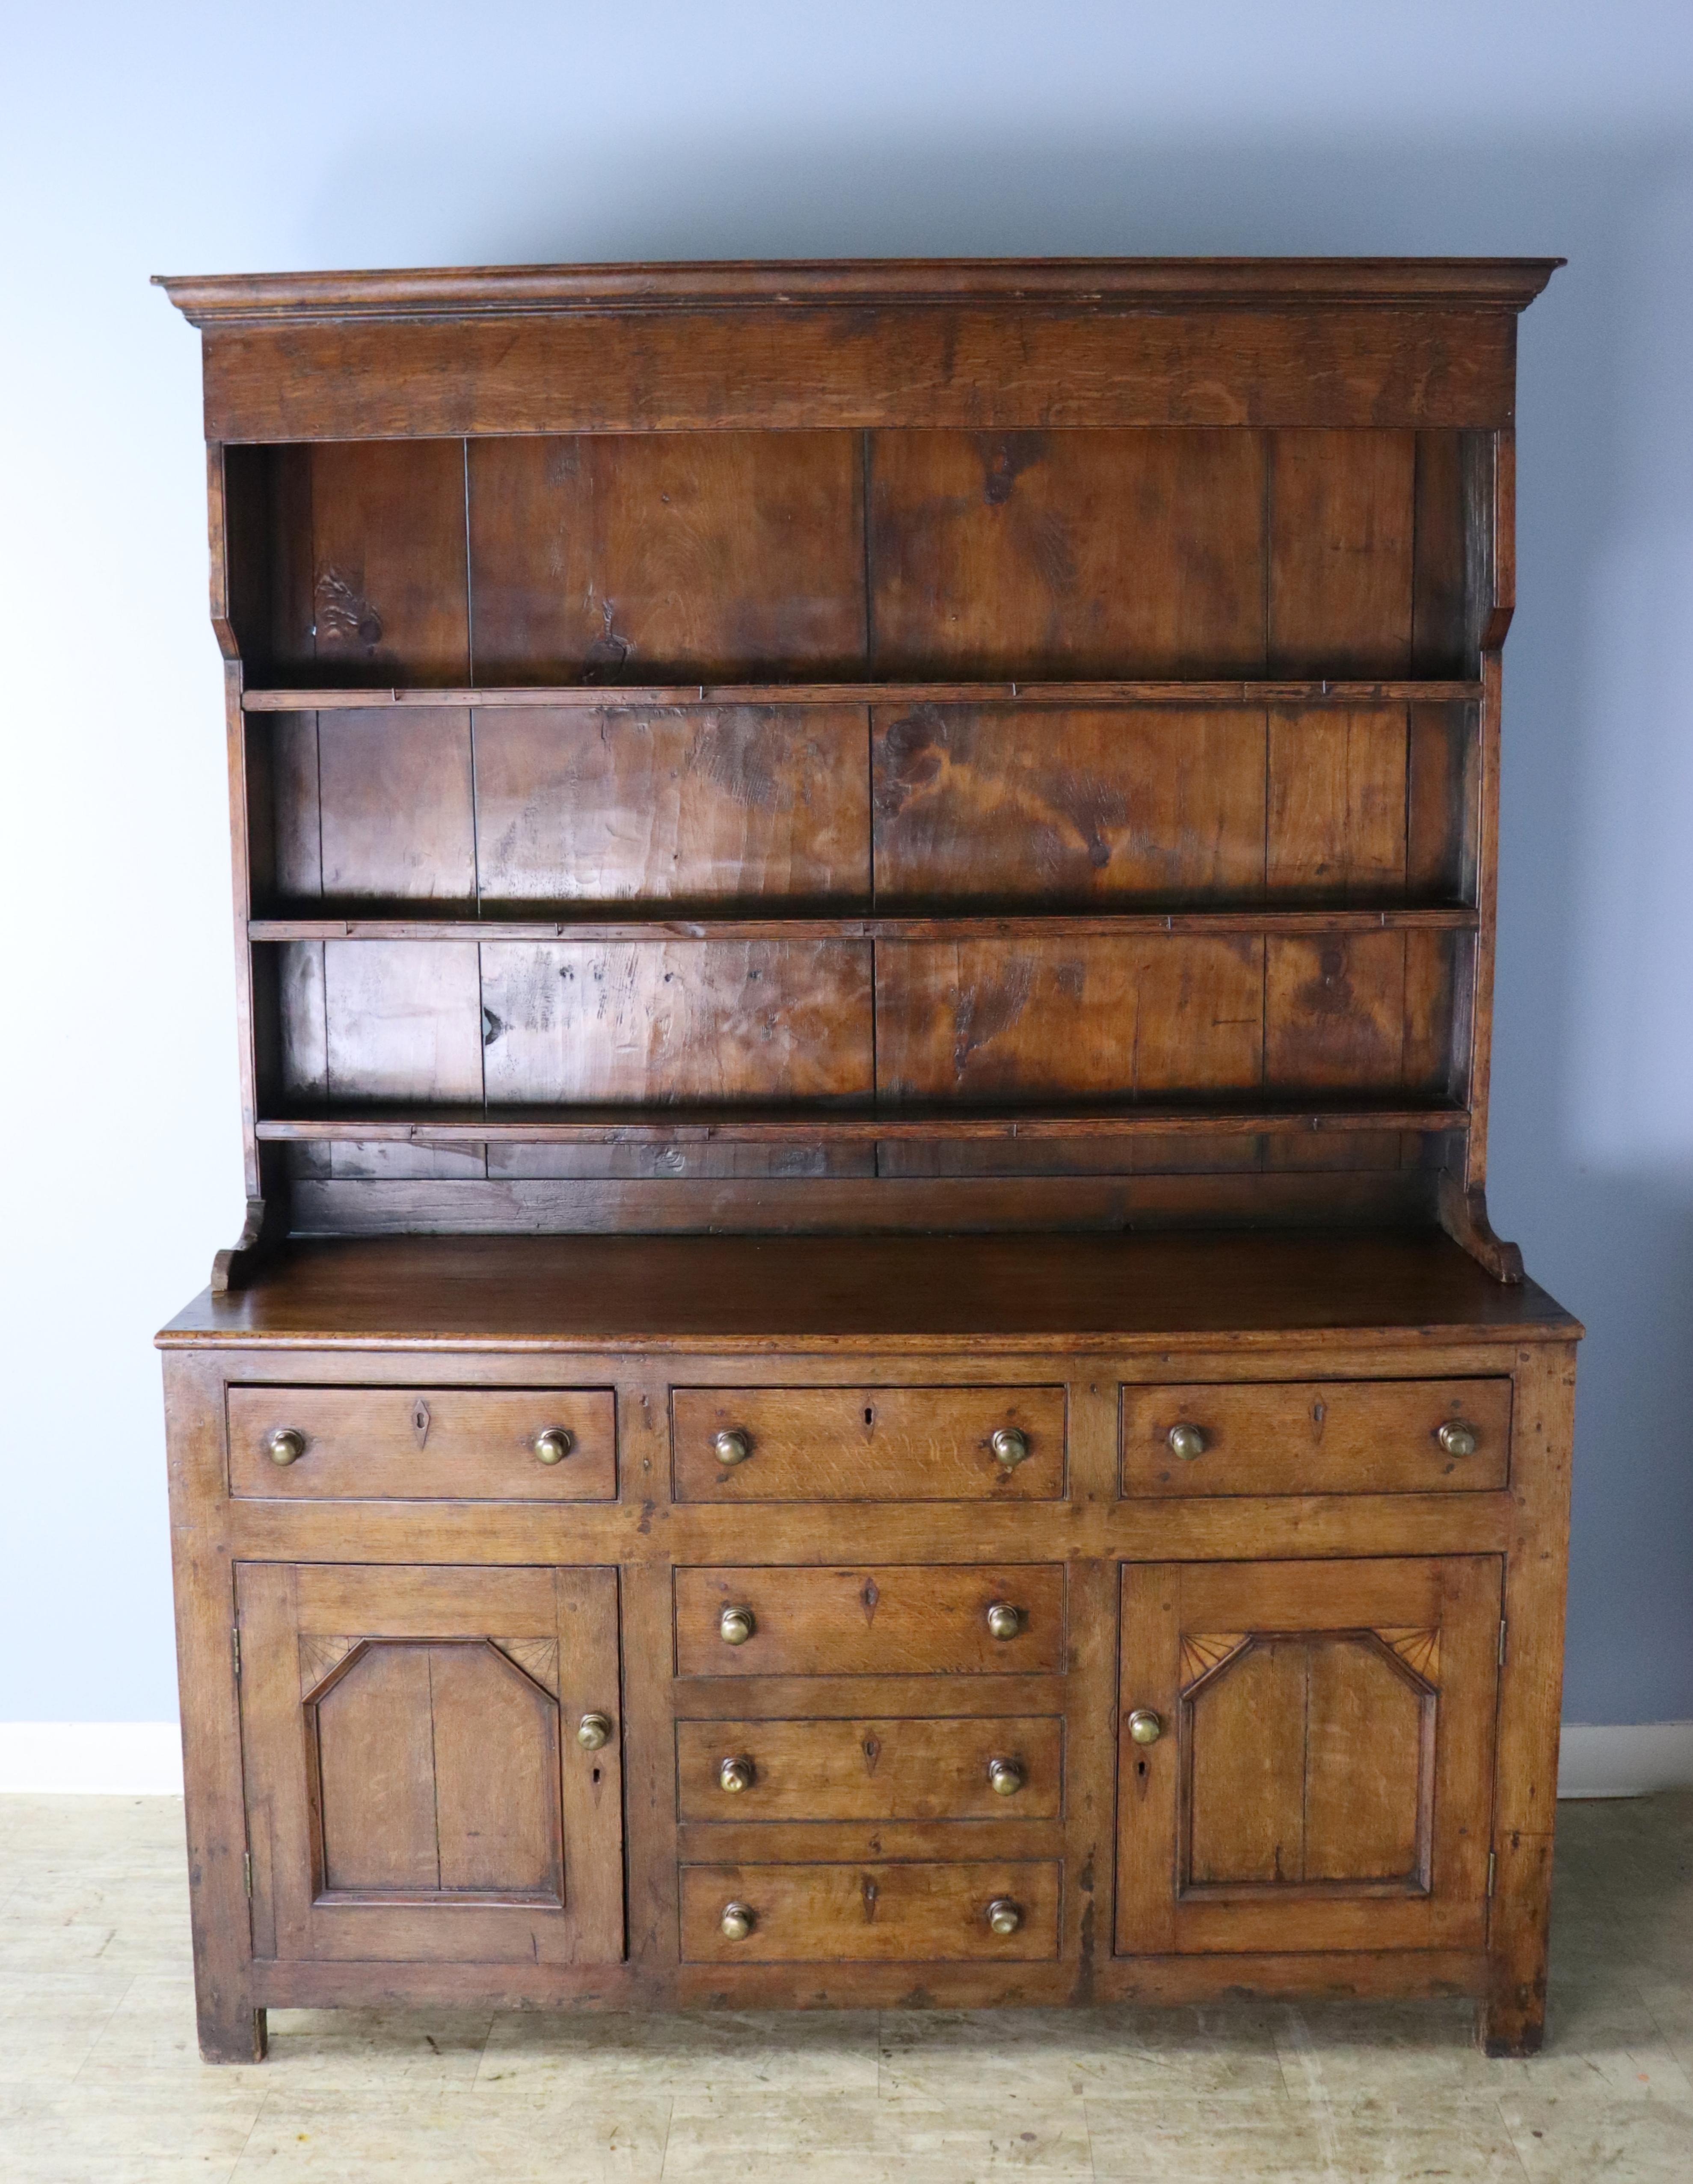 A classic early country hutch from Wales. The pine of this antique dresser is a rich dark color, with some traces of old green paint on the shelves. Note the etched fan motif on the doors, shown in thumbnail. The depth of the three shelves is 5